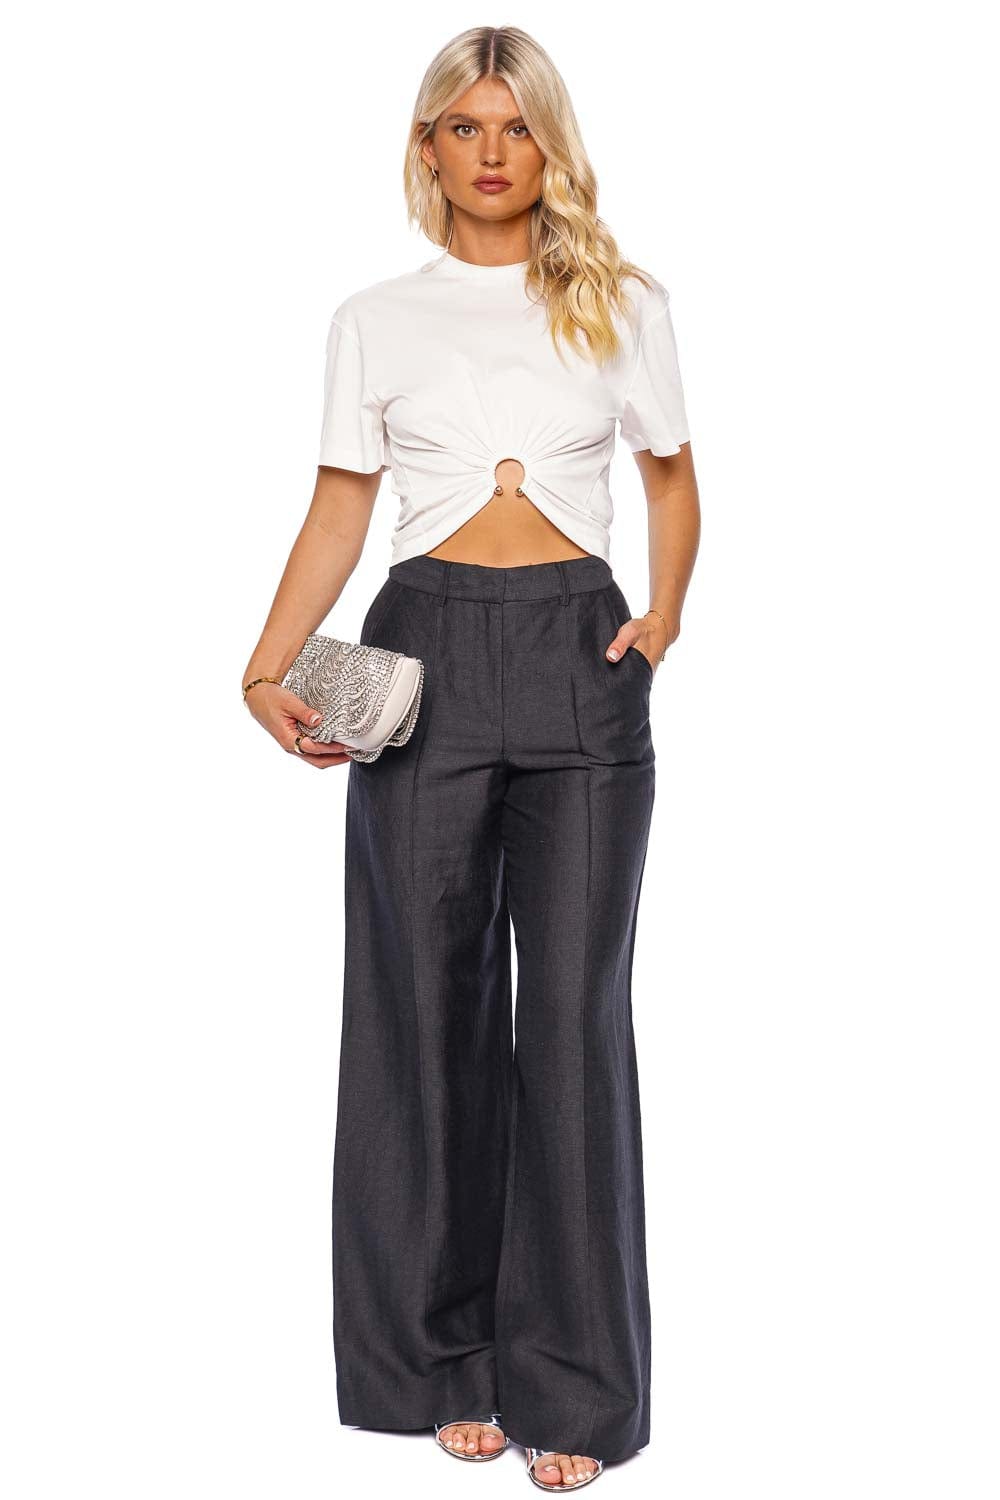 Paco Rabanne Gathered Ring Cotton Cropped Tee